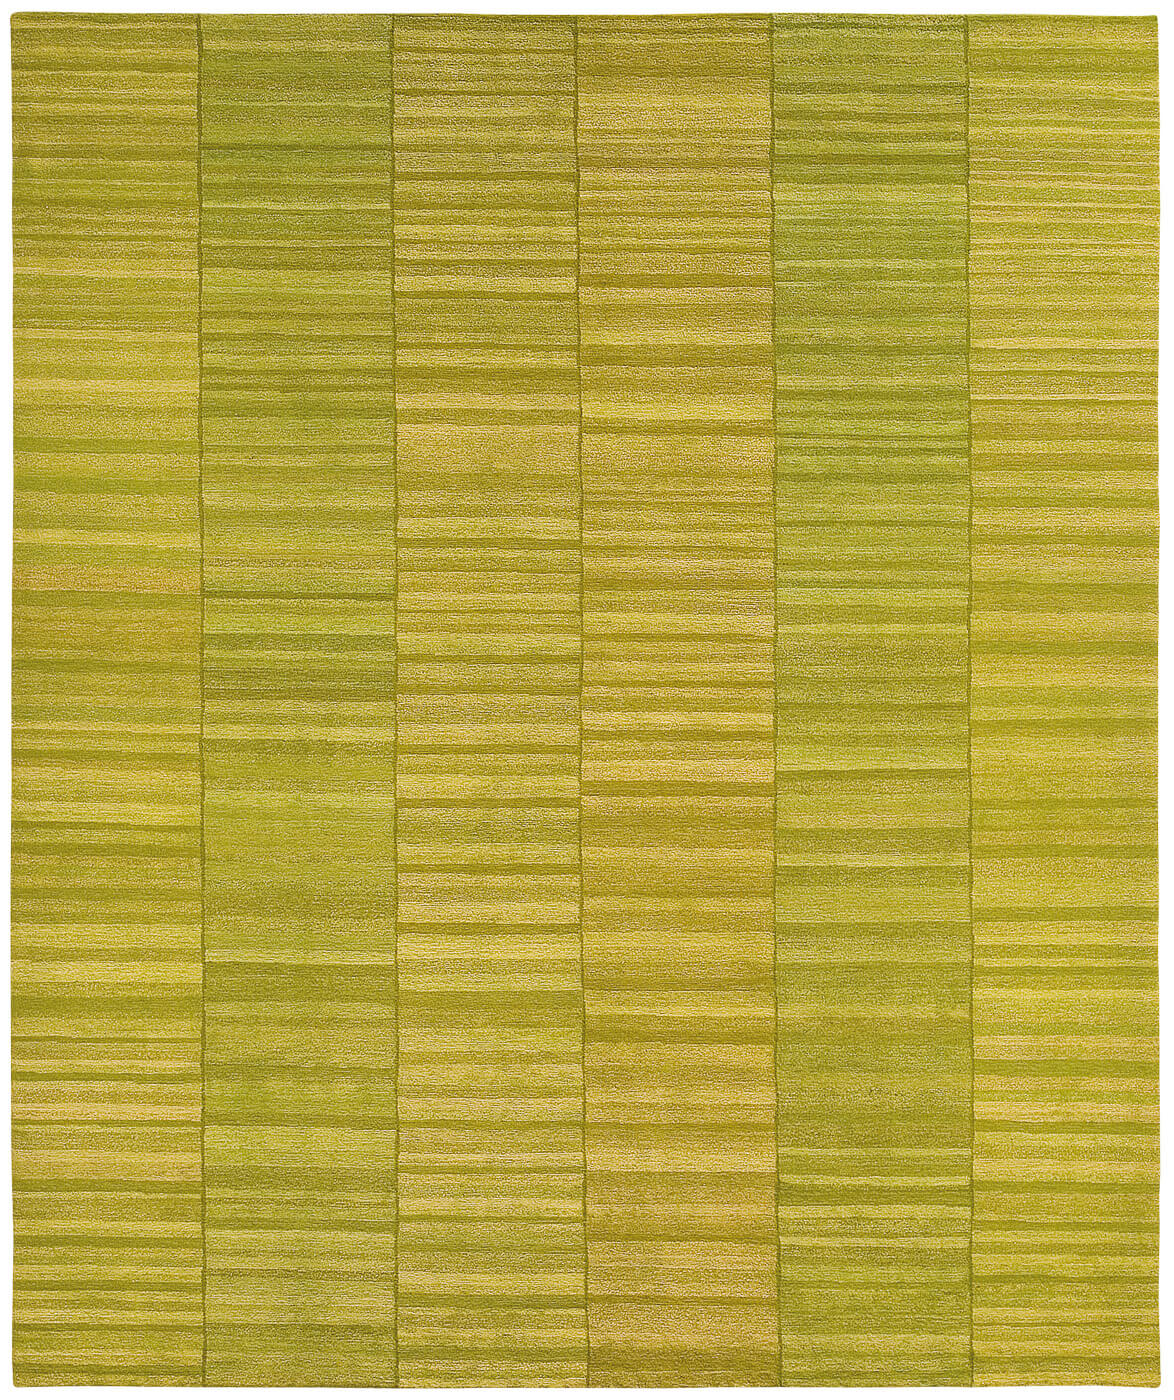 Hand-woven Bright Green Luxury Rug ☞ Size: 200 x 300 cm